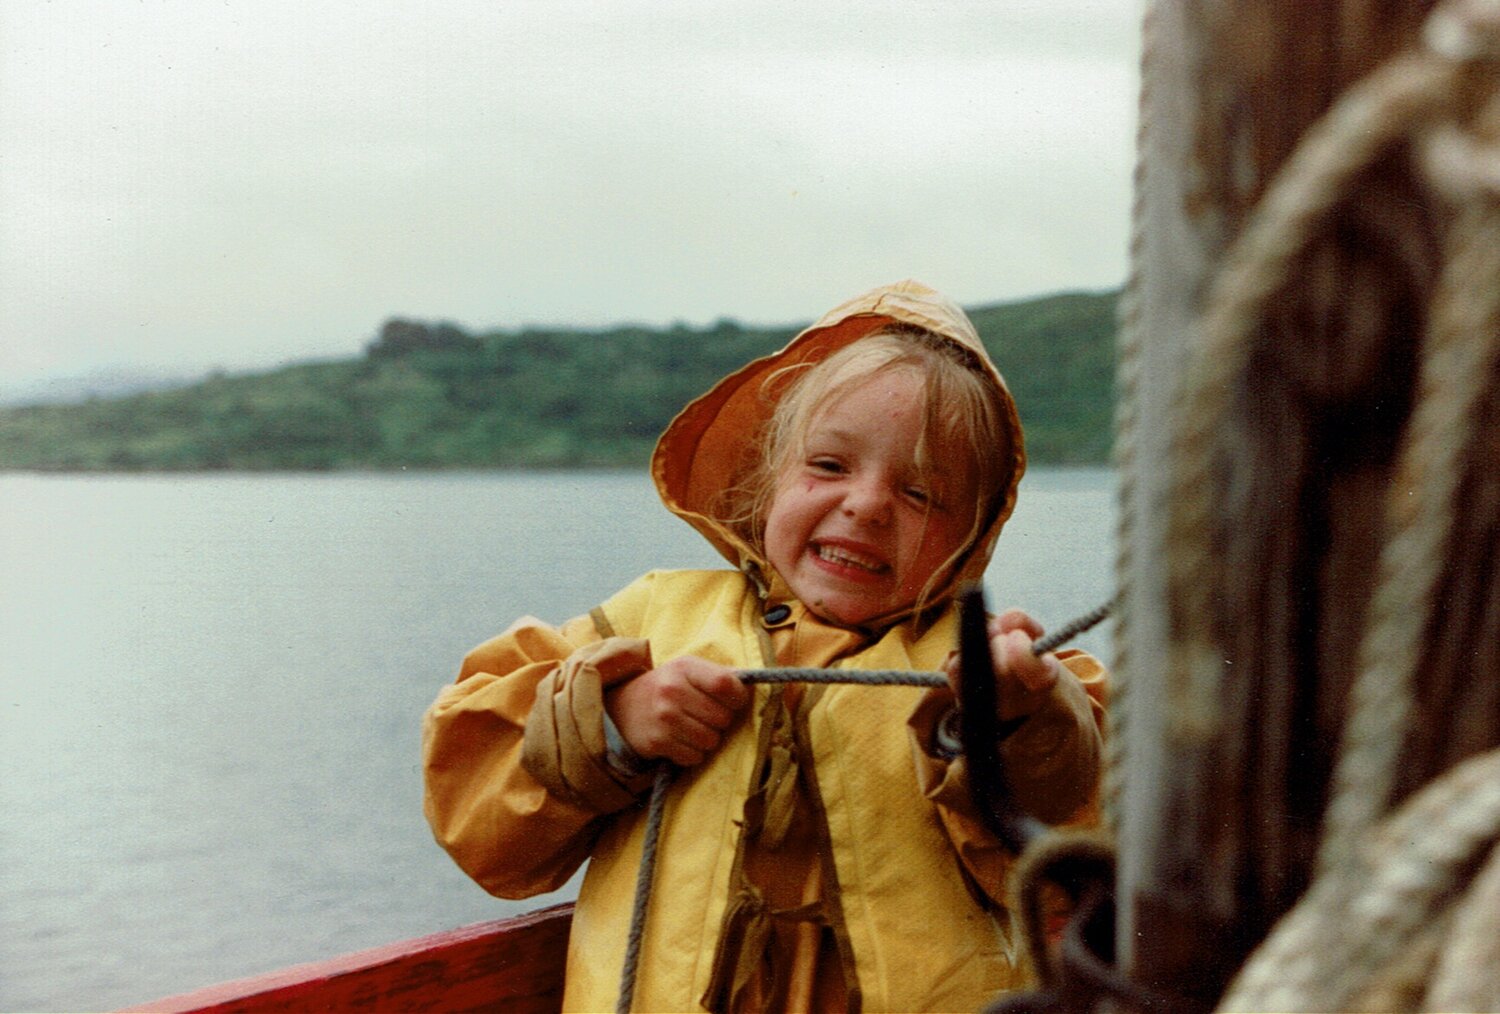 Tiny Sailor MJ in her Oilies off the West coast of Ireland (sometime between the late 1980s and early 1990s)